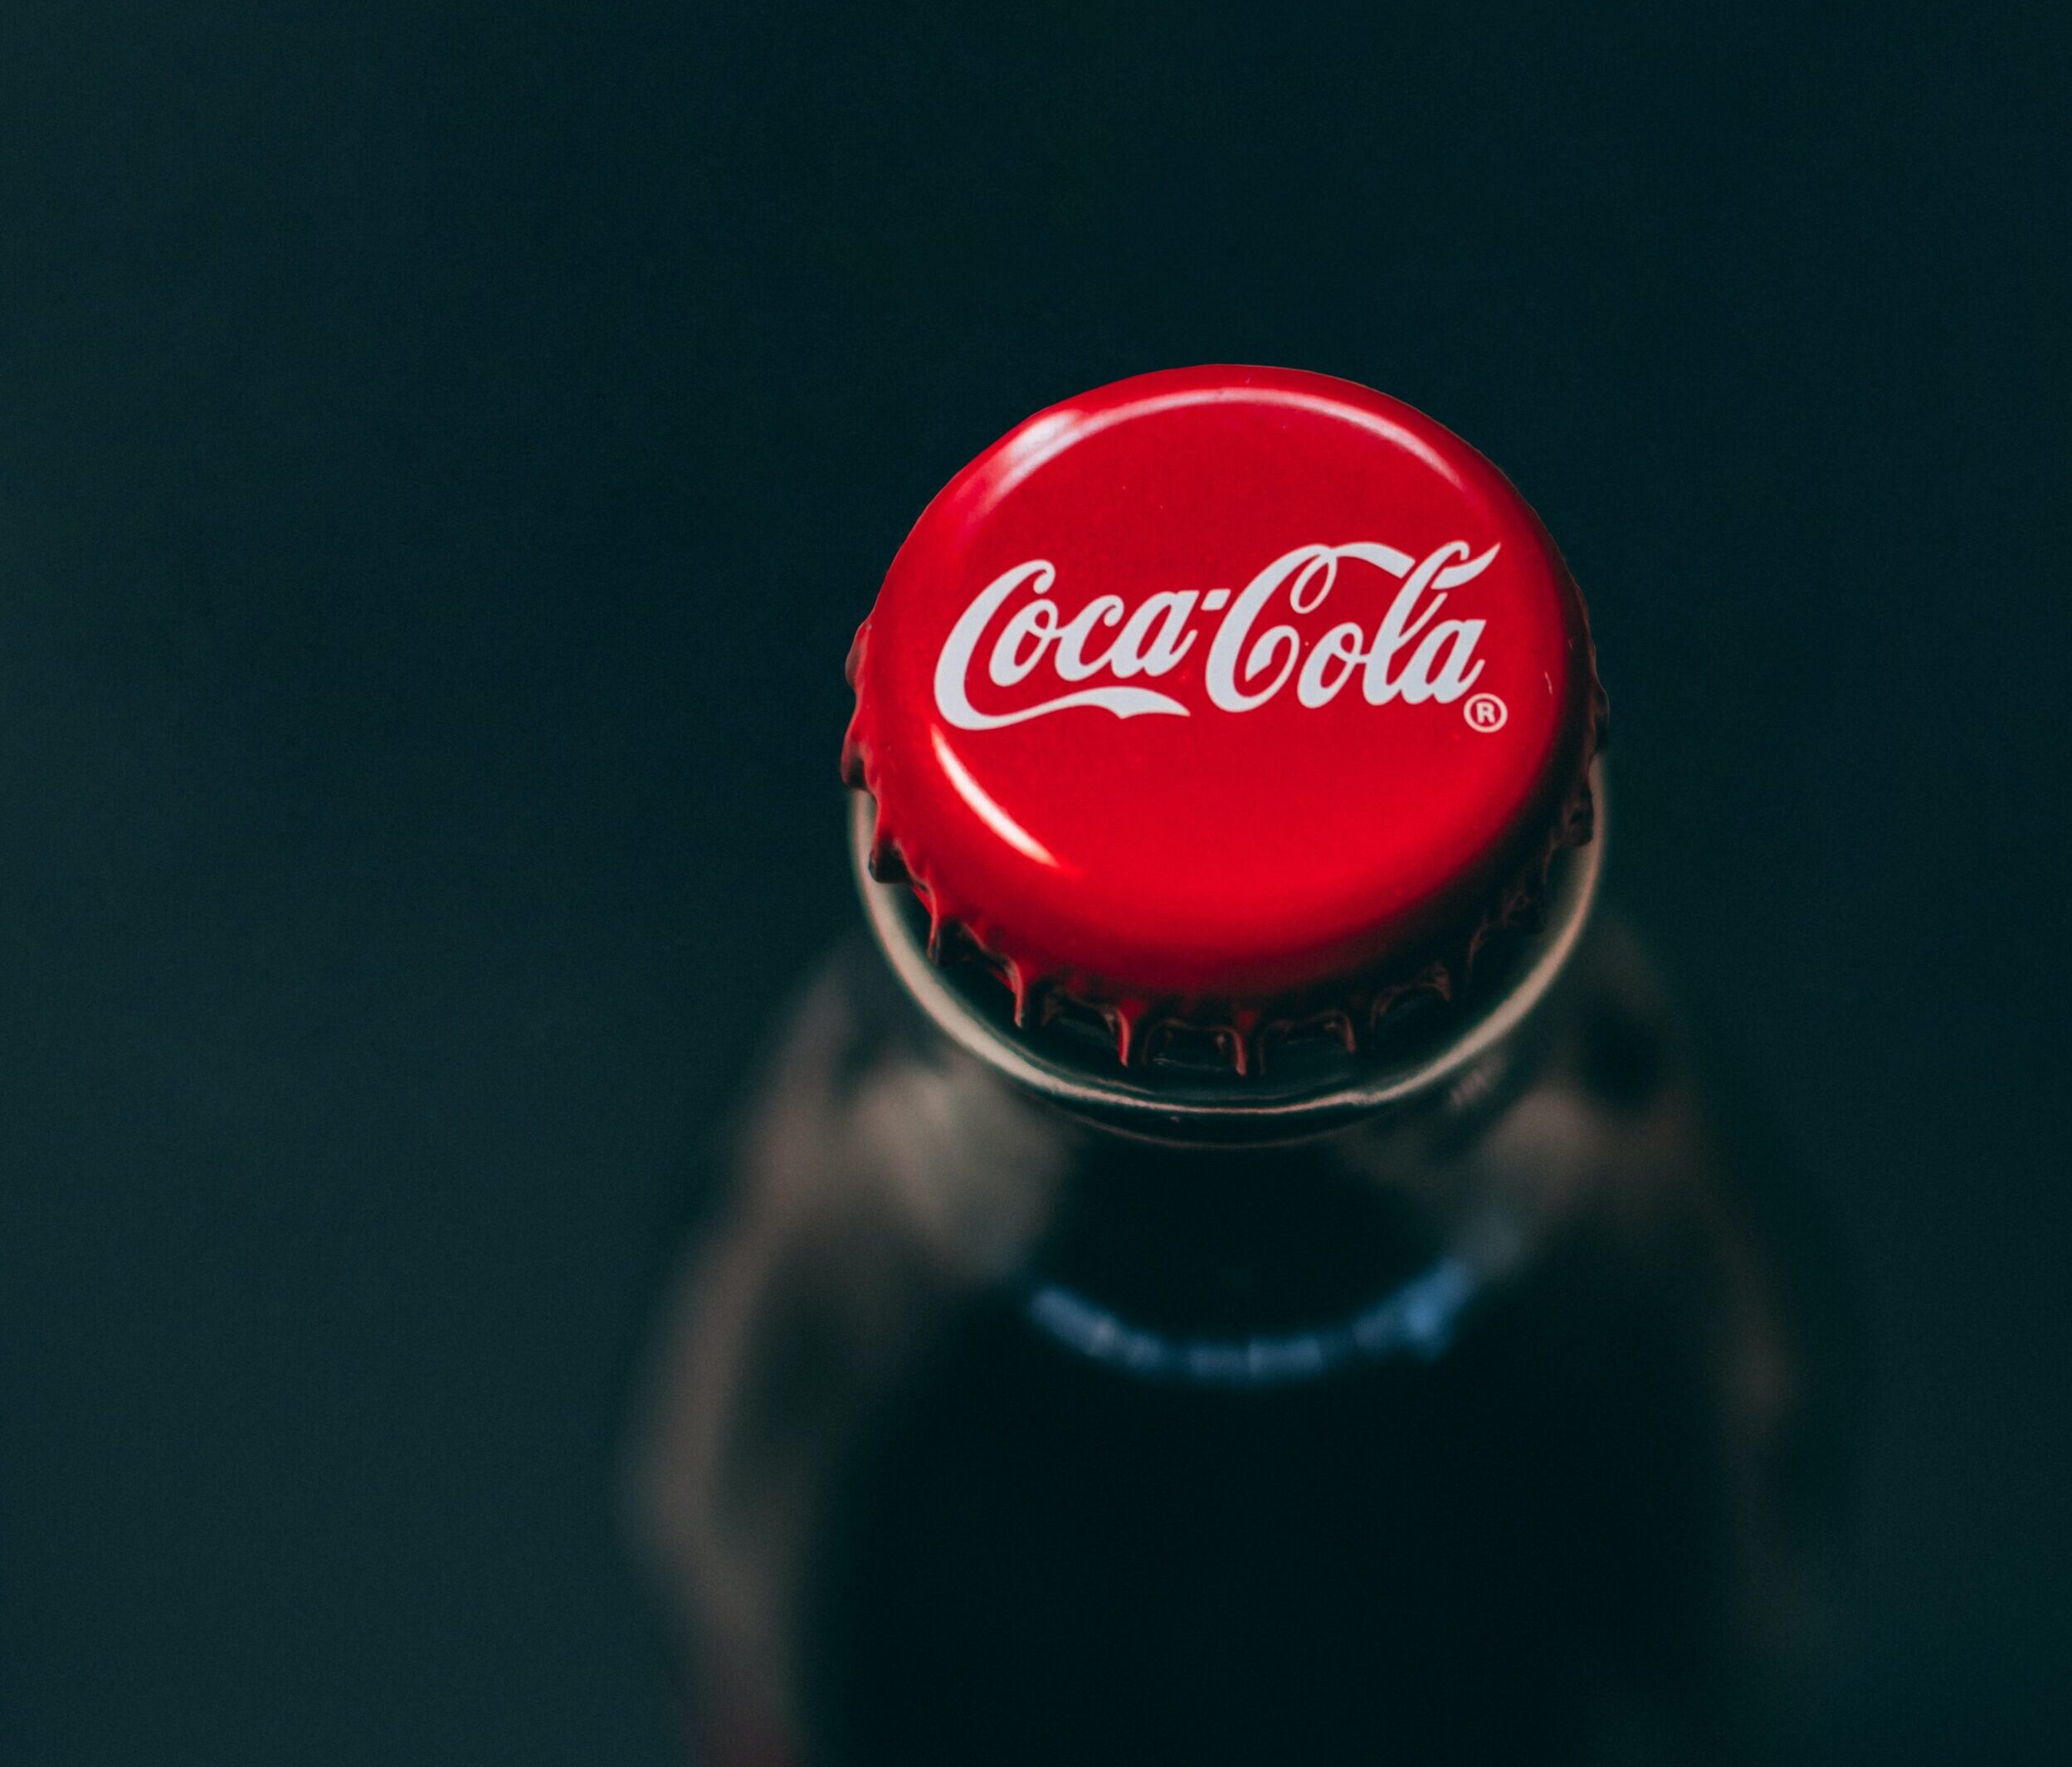 How Coca-Cola refreshed itself in the face of changing tastes - I